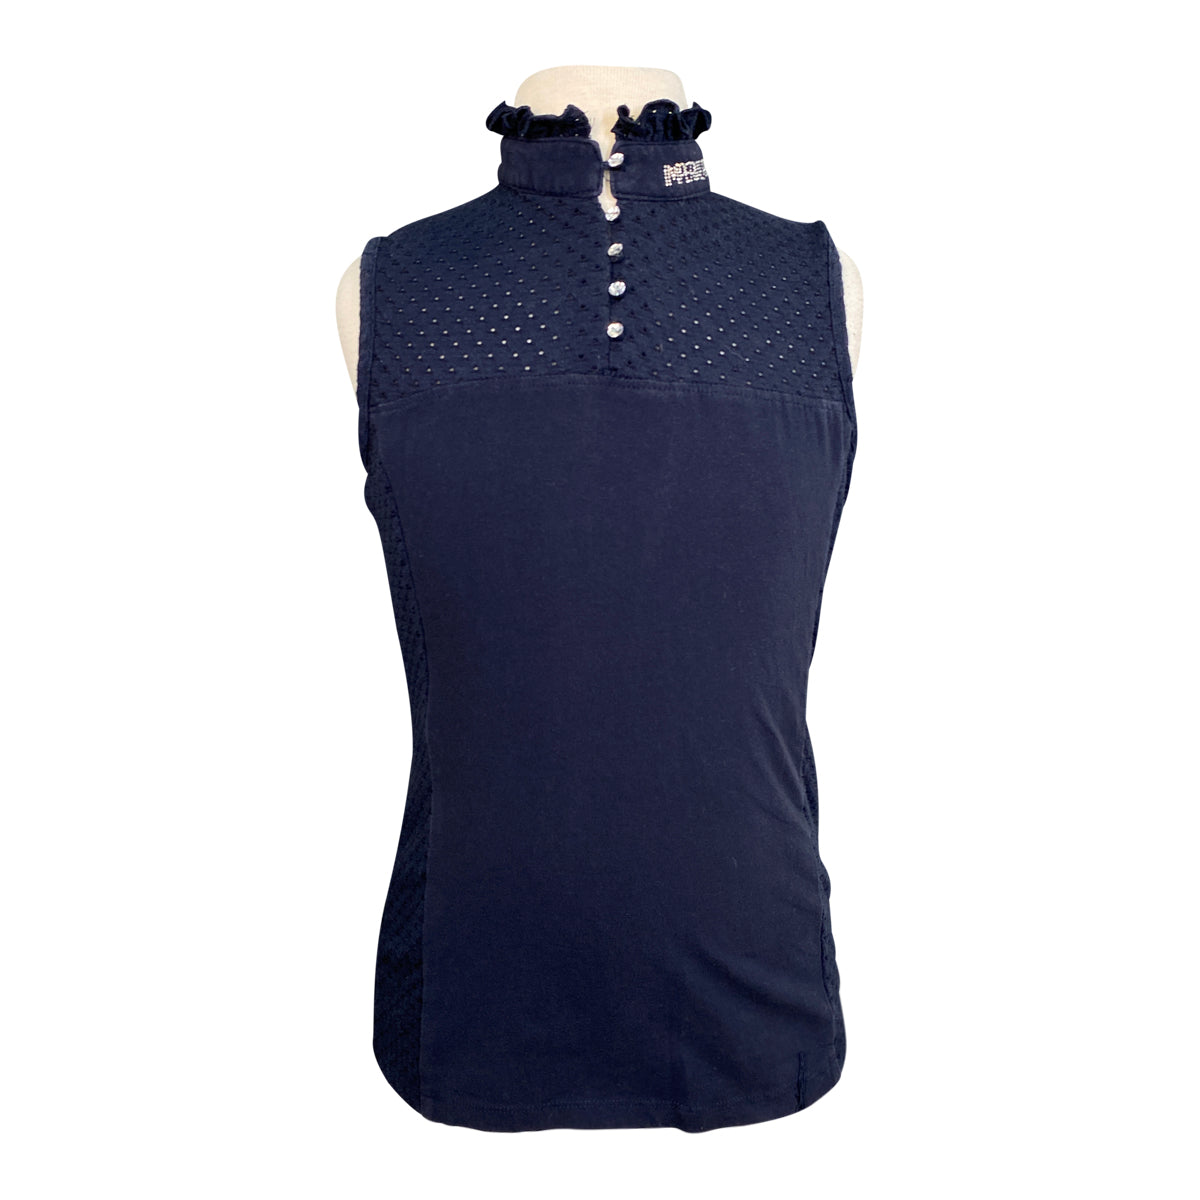 Imperial Riding Sleeveless Riding Top in Navy